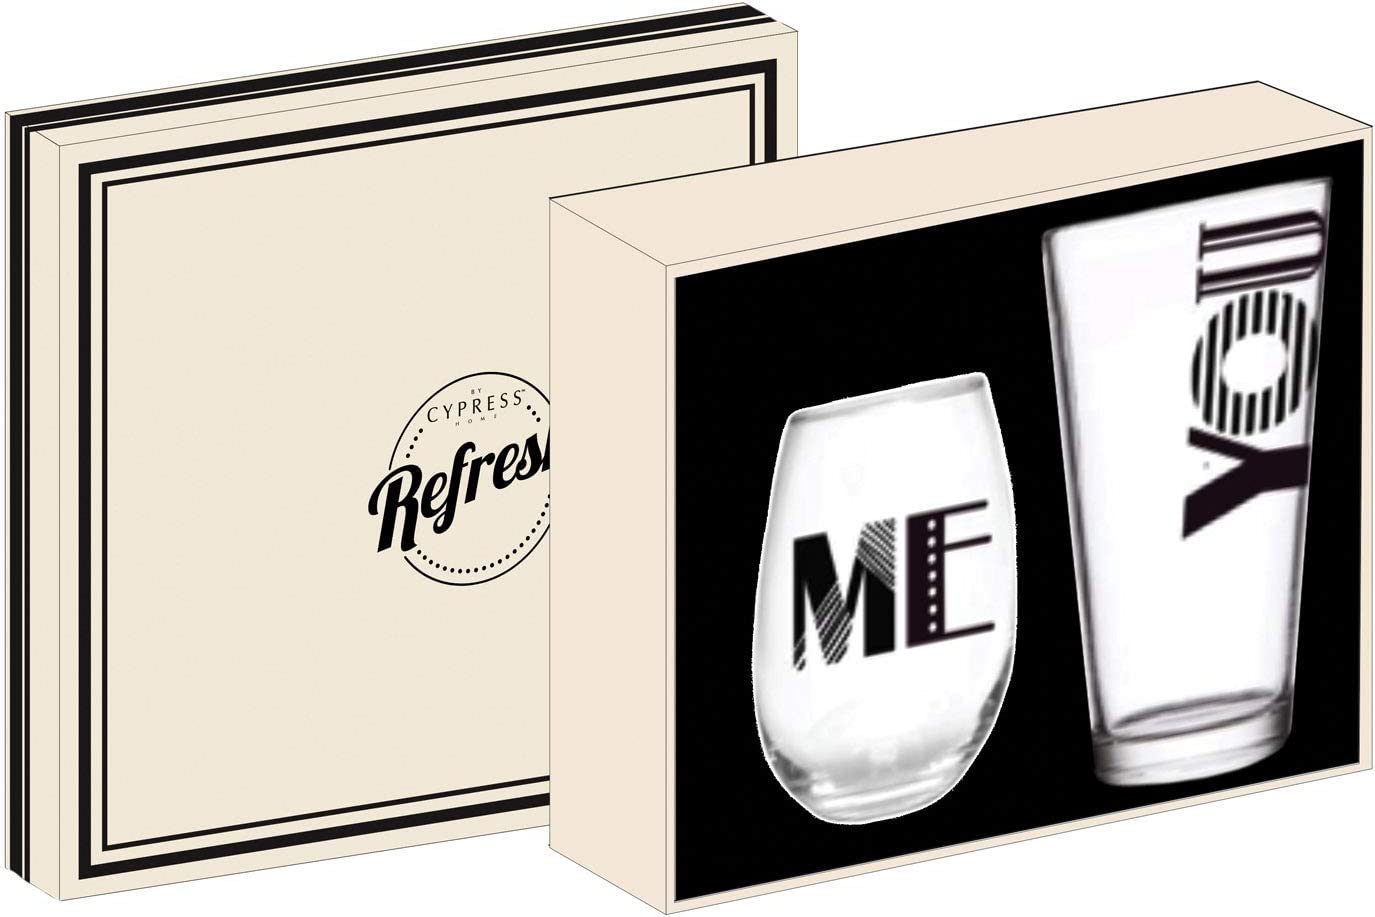 Me & You Stemless Wine Glass & Beer Glass Gift Set -9 x 7 x 5 Inches